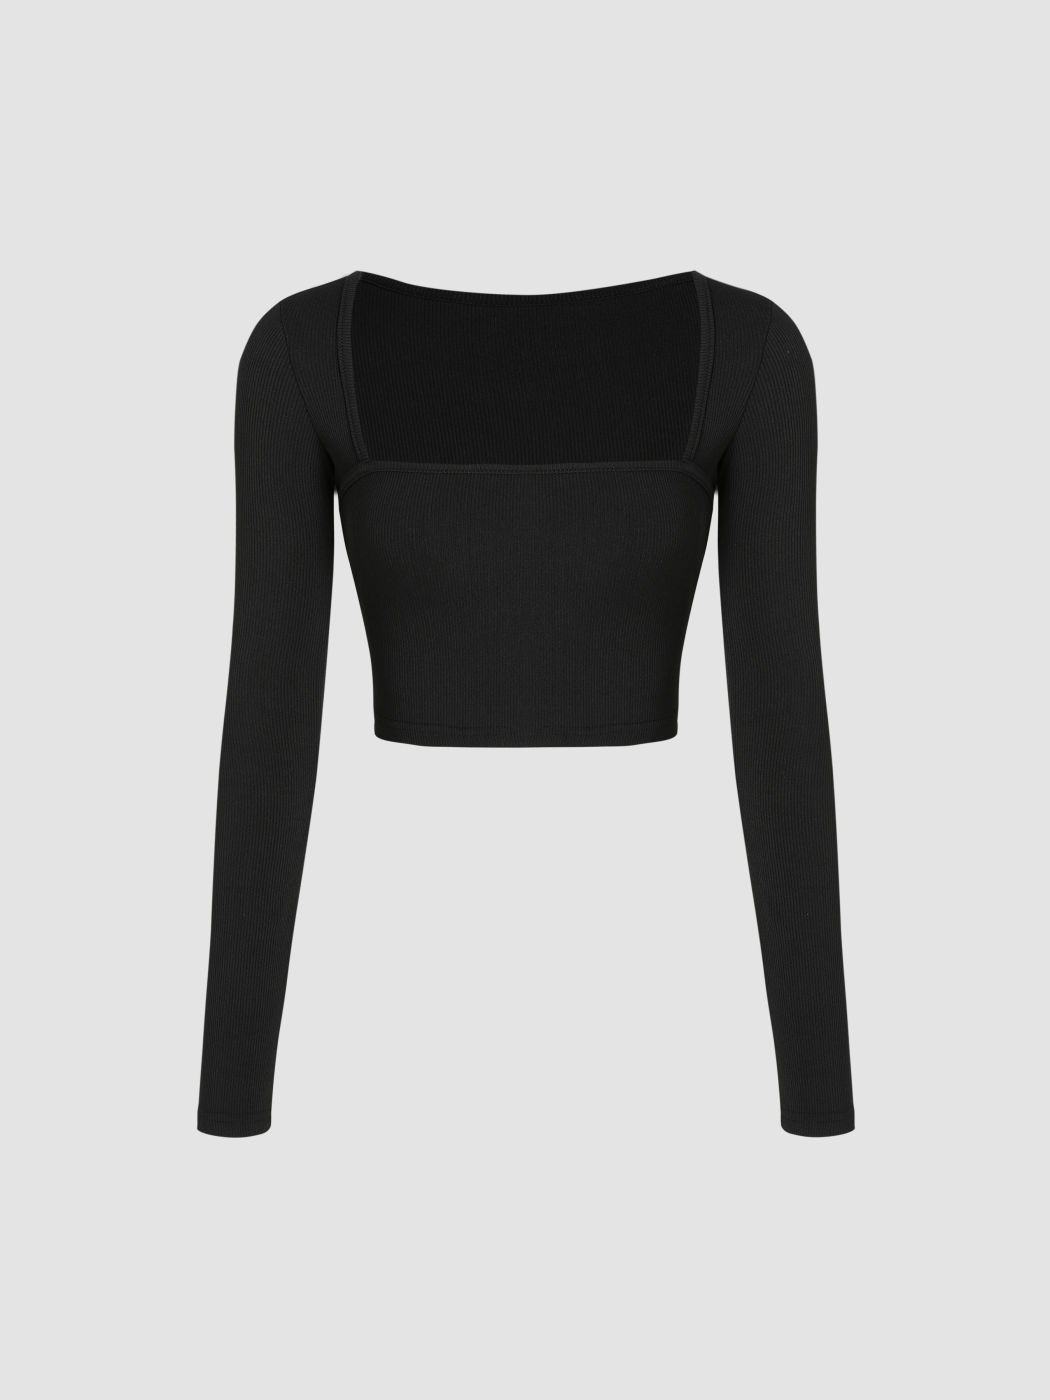 Solid Square Neck Knitted Crop Top - Cider